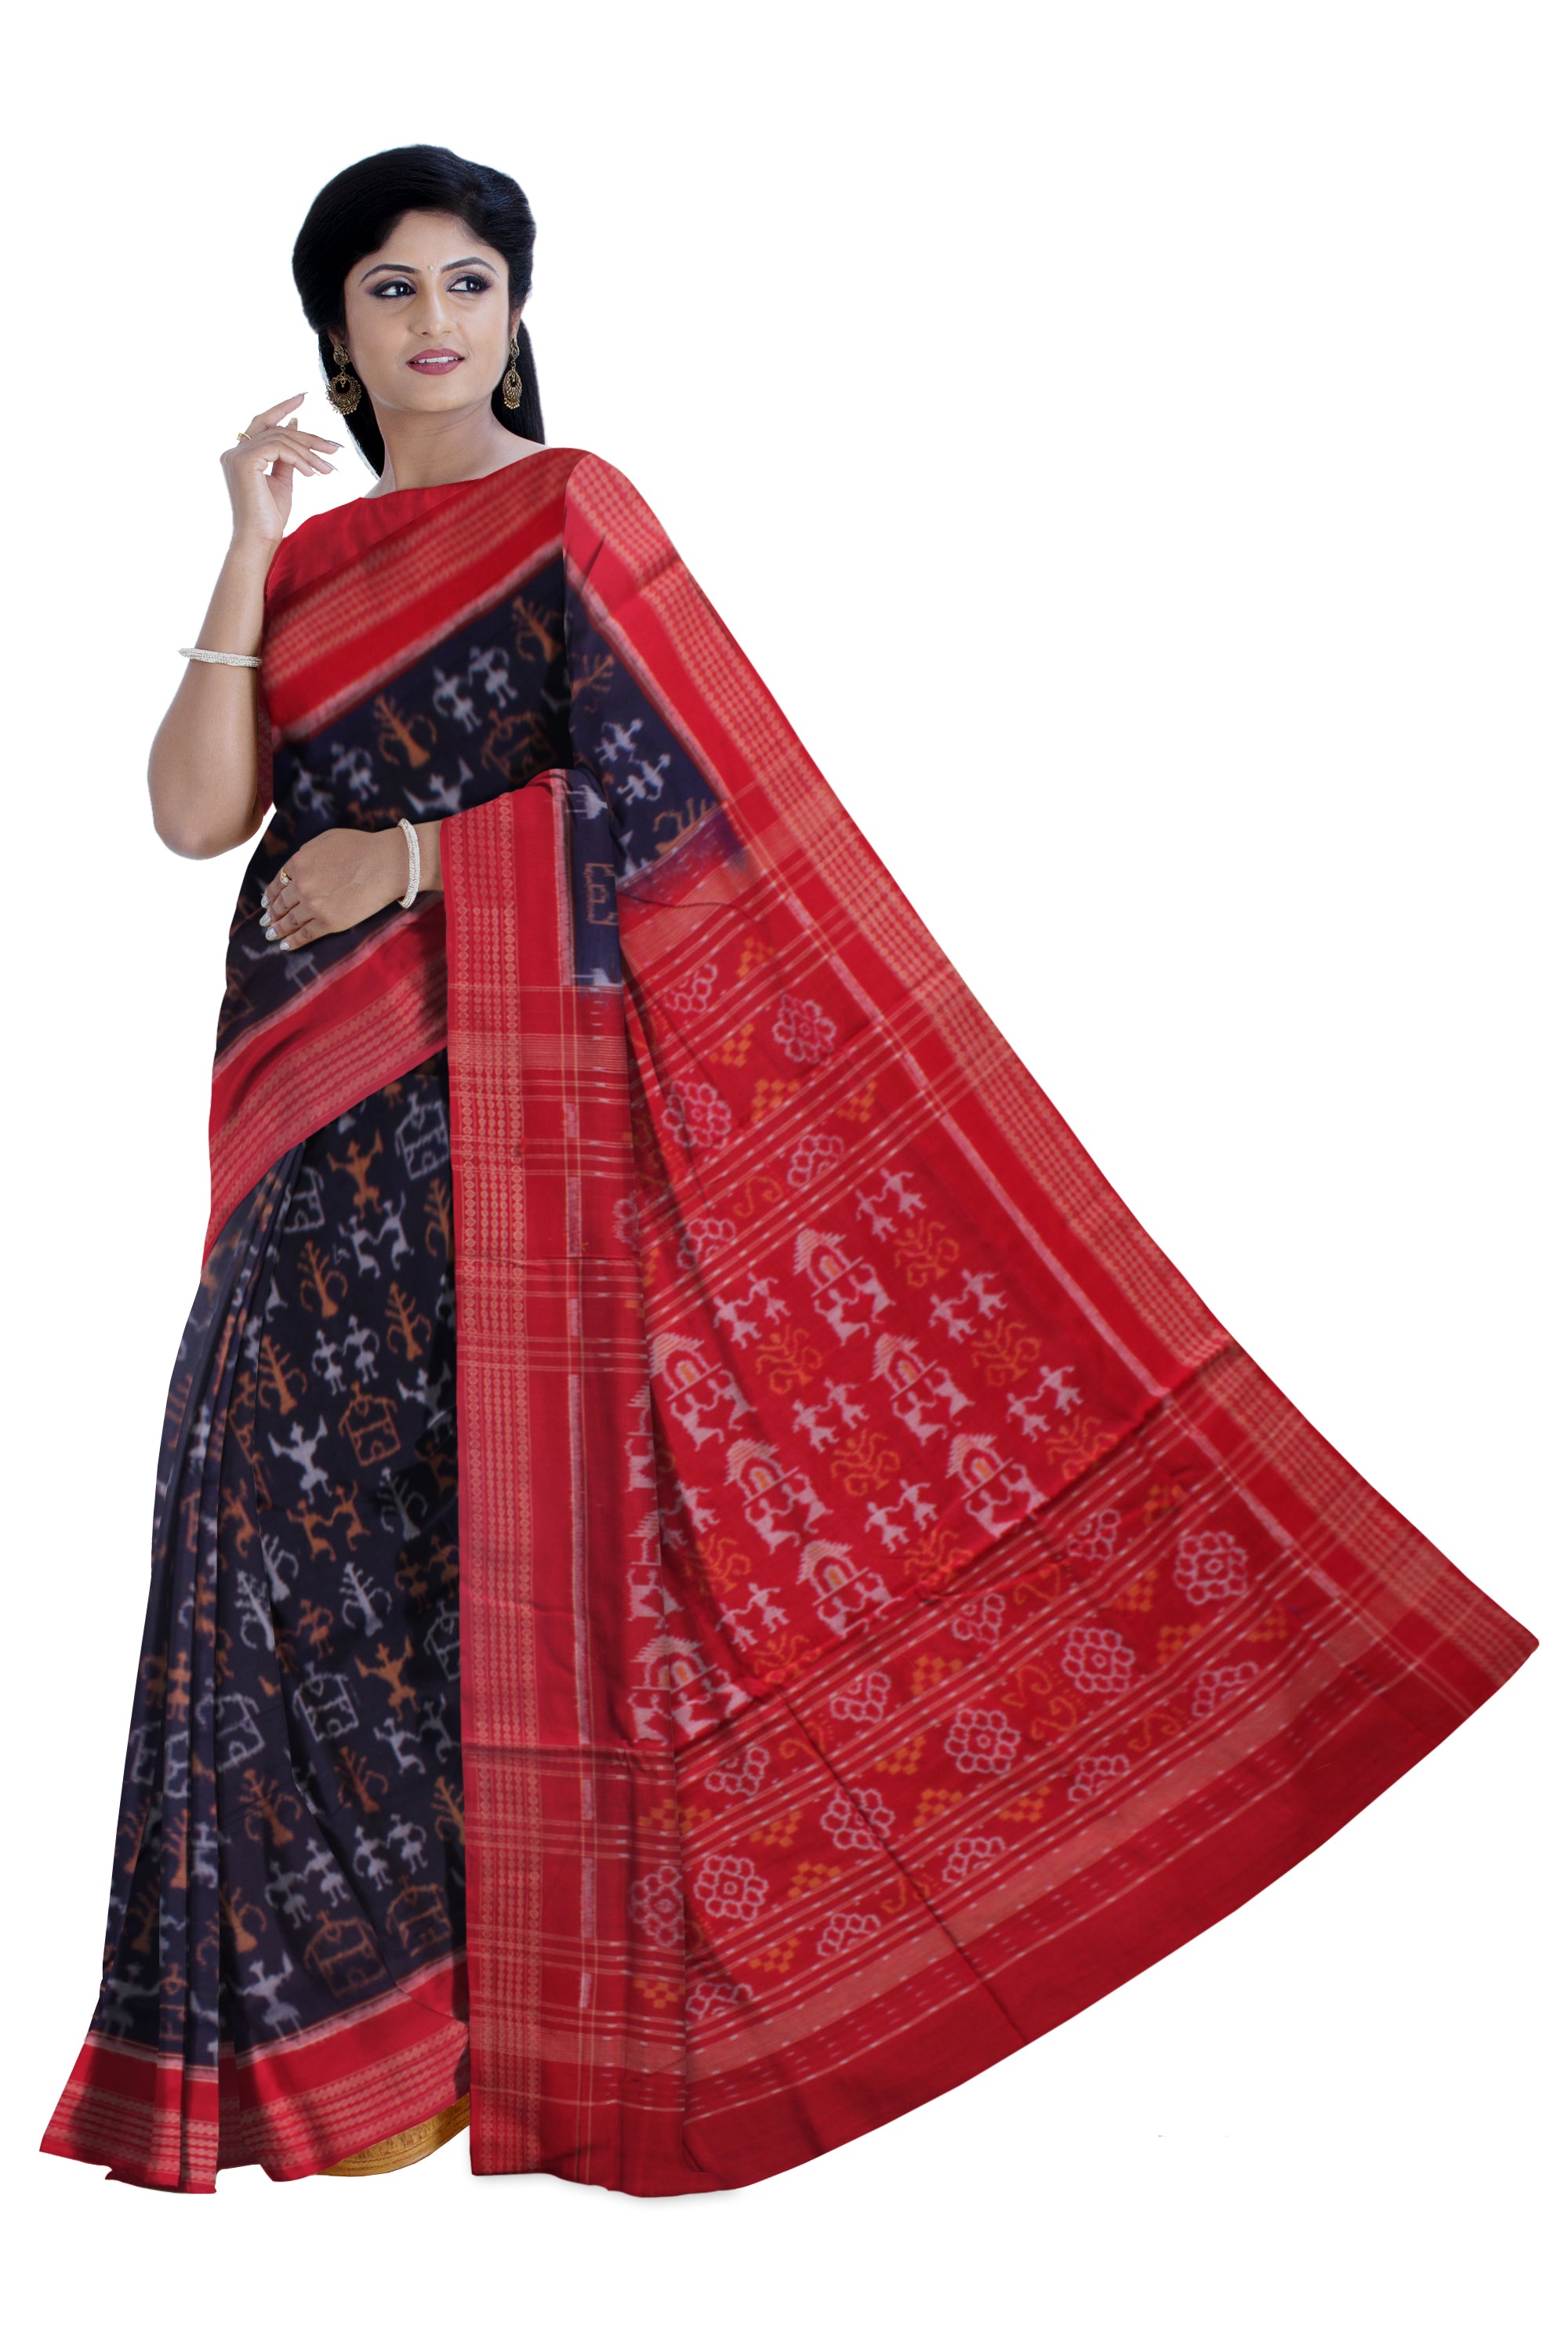 TRADITIONAL TERRACOTTA PATTERN BLUE AND RED COLOR PURE COTTON SAREE,WITH MATCHING BLOUSE PIECE. - Koshali Arts & Crafts Enterprise